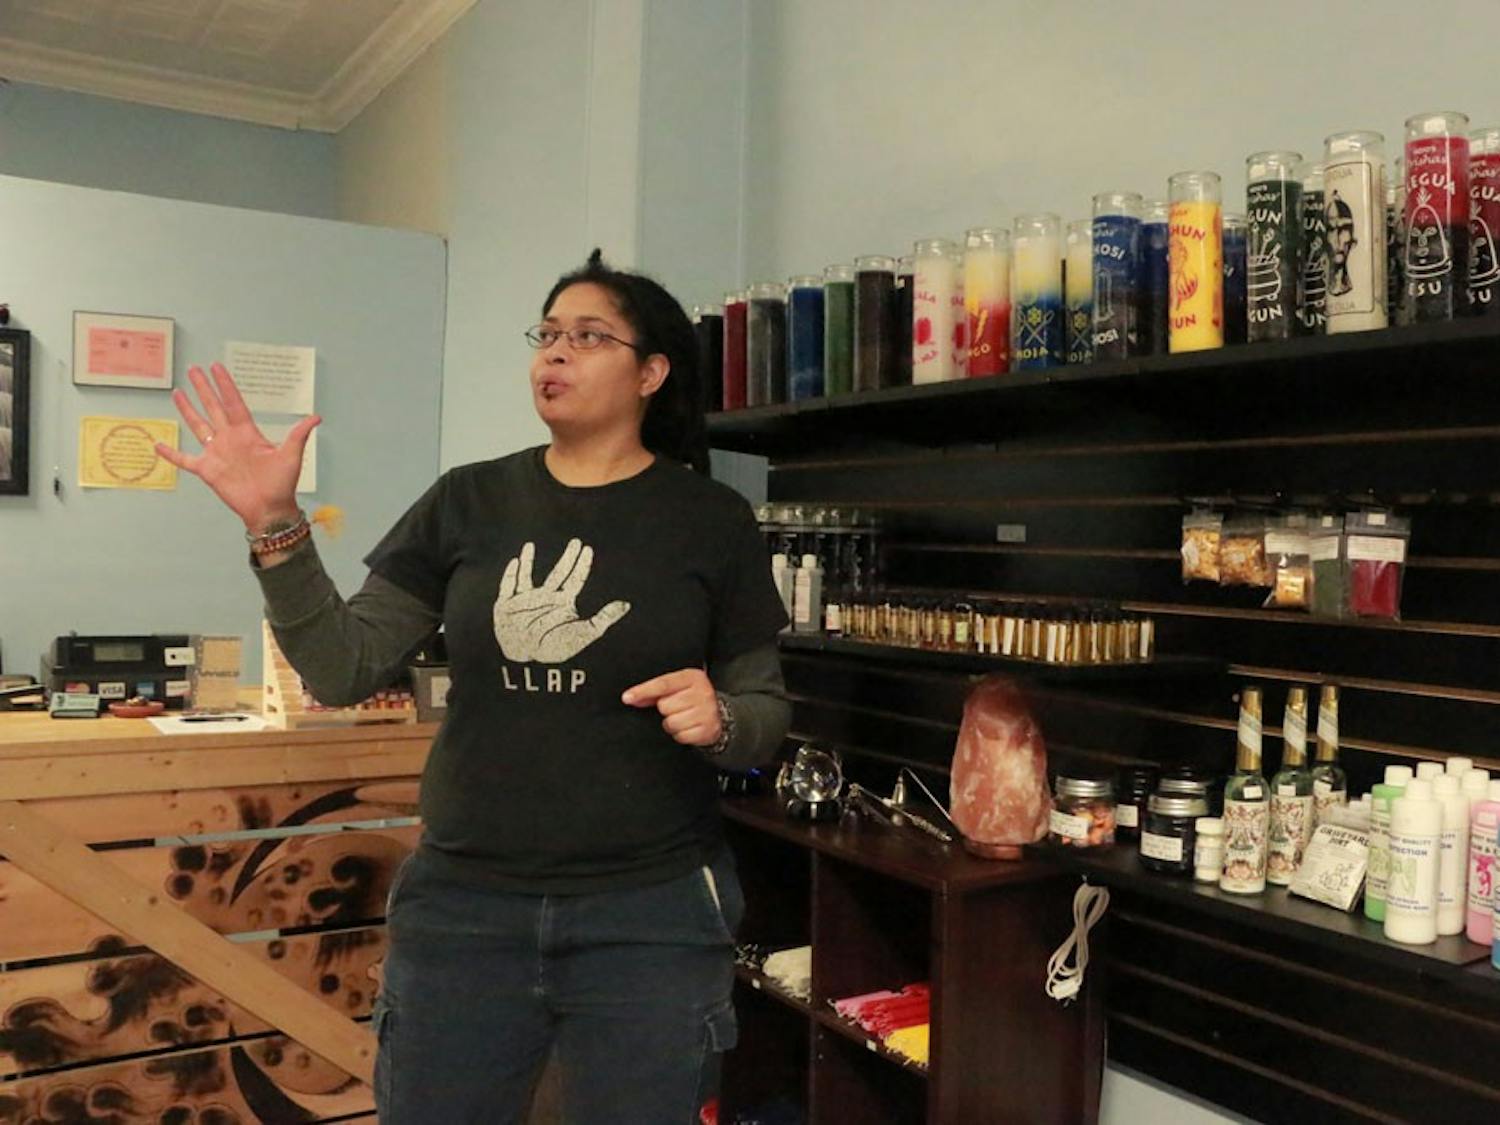 Kurtlyn Cunningham, owner of Love, Light &amp; Magick, shows off some of her store’s goods. Love Light &amp; Magick is one of many spiritual specialty stores scattered around Buffalo, alongside Strange Brew in Kenmore and Spiritually Rooted in North Tonawanda, which form the core of Buffalo’s metaphysical community, often offering tarot readings, psychic development workshops and henna drawings.